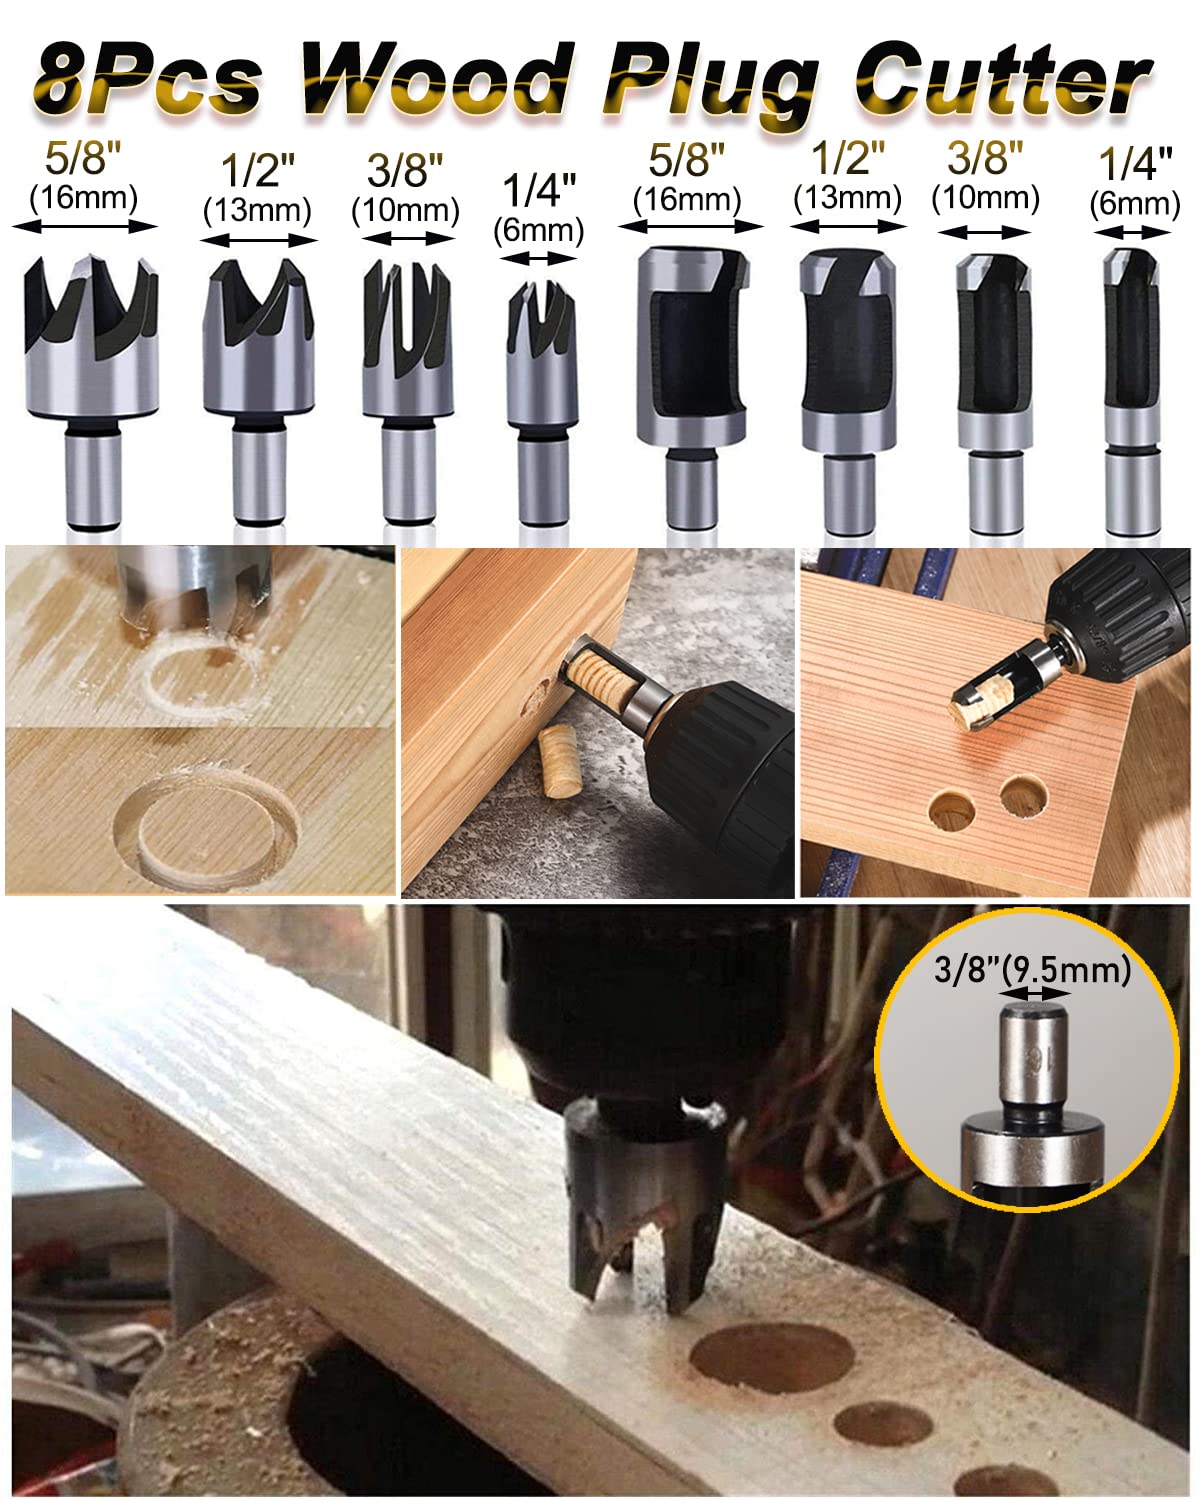 Rocaris 32 Pack Woodworking Chamfer Drilling Tools, Including Countersink Drill Bits, L-Wrench, Wood Plug Cutter, Step Bit, Center Punch, Cutting